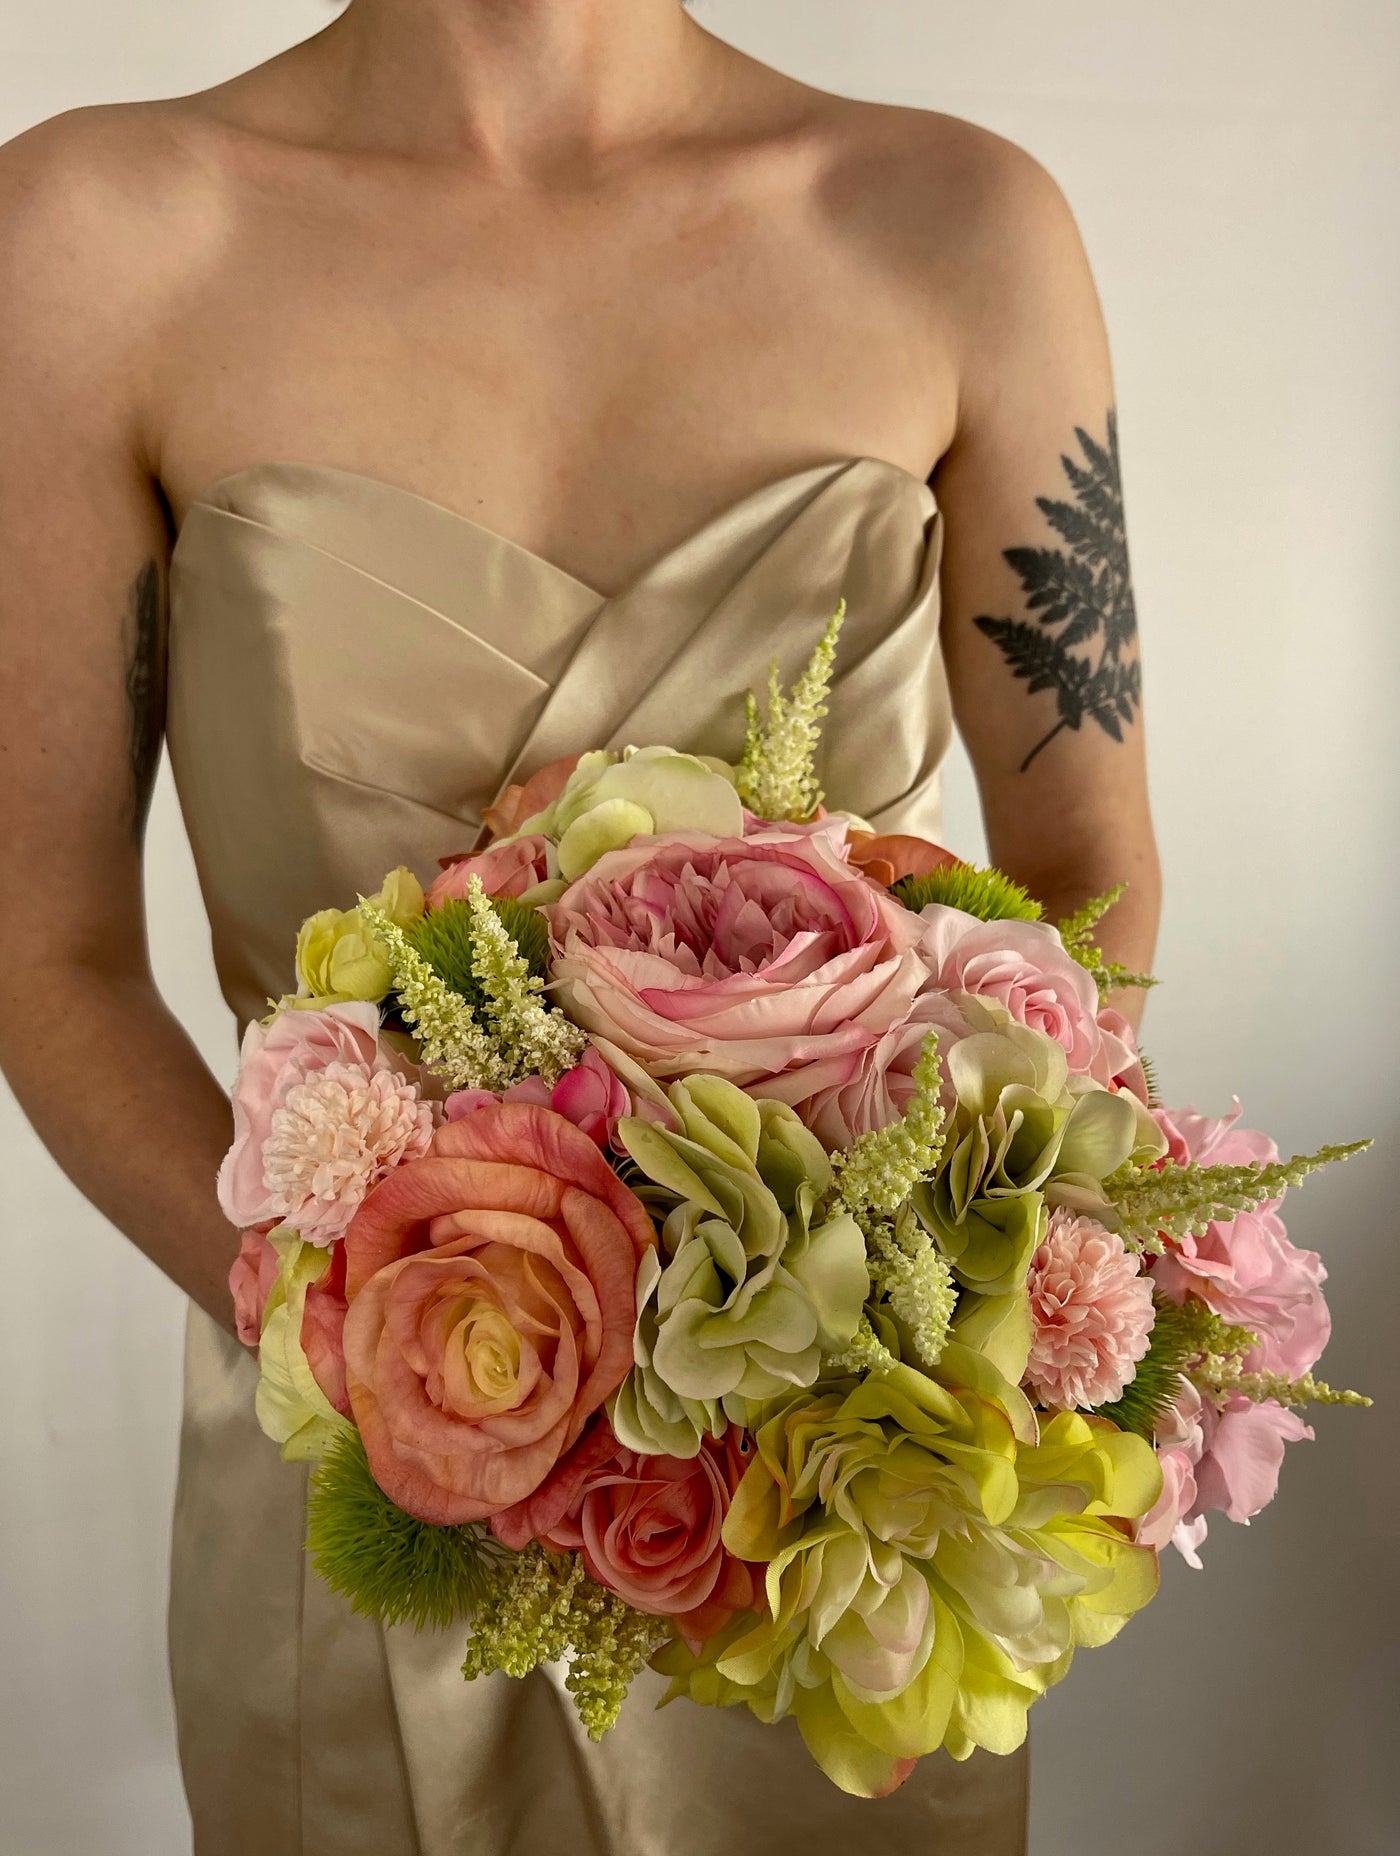 Rent-A Rose-Bridesmaid Bouquet-Pink-pale lime green-Roses-Hydrangea. Five day rental for $69.00